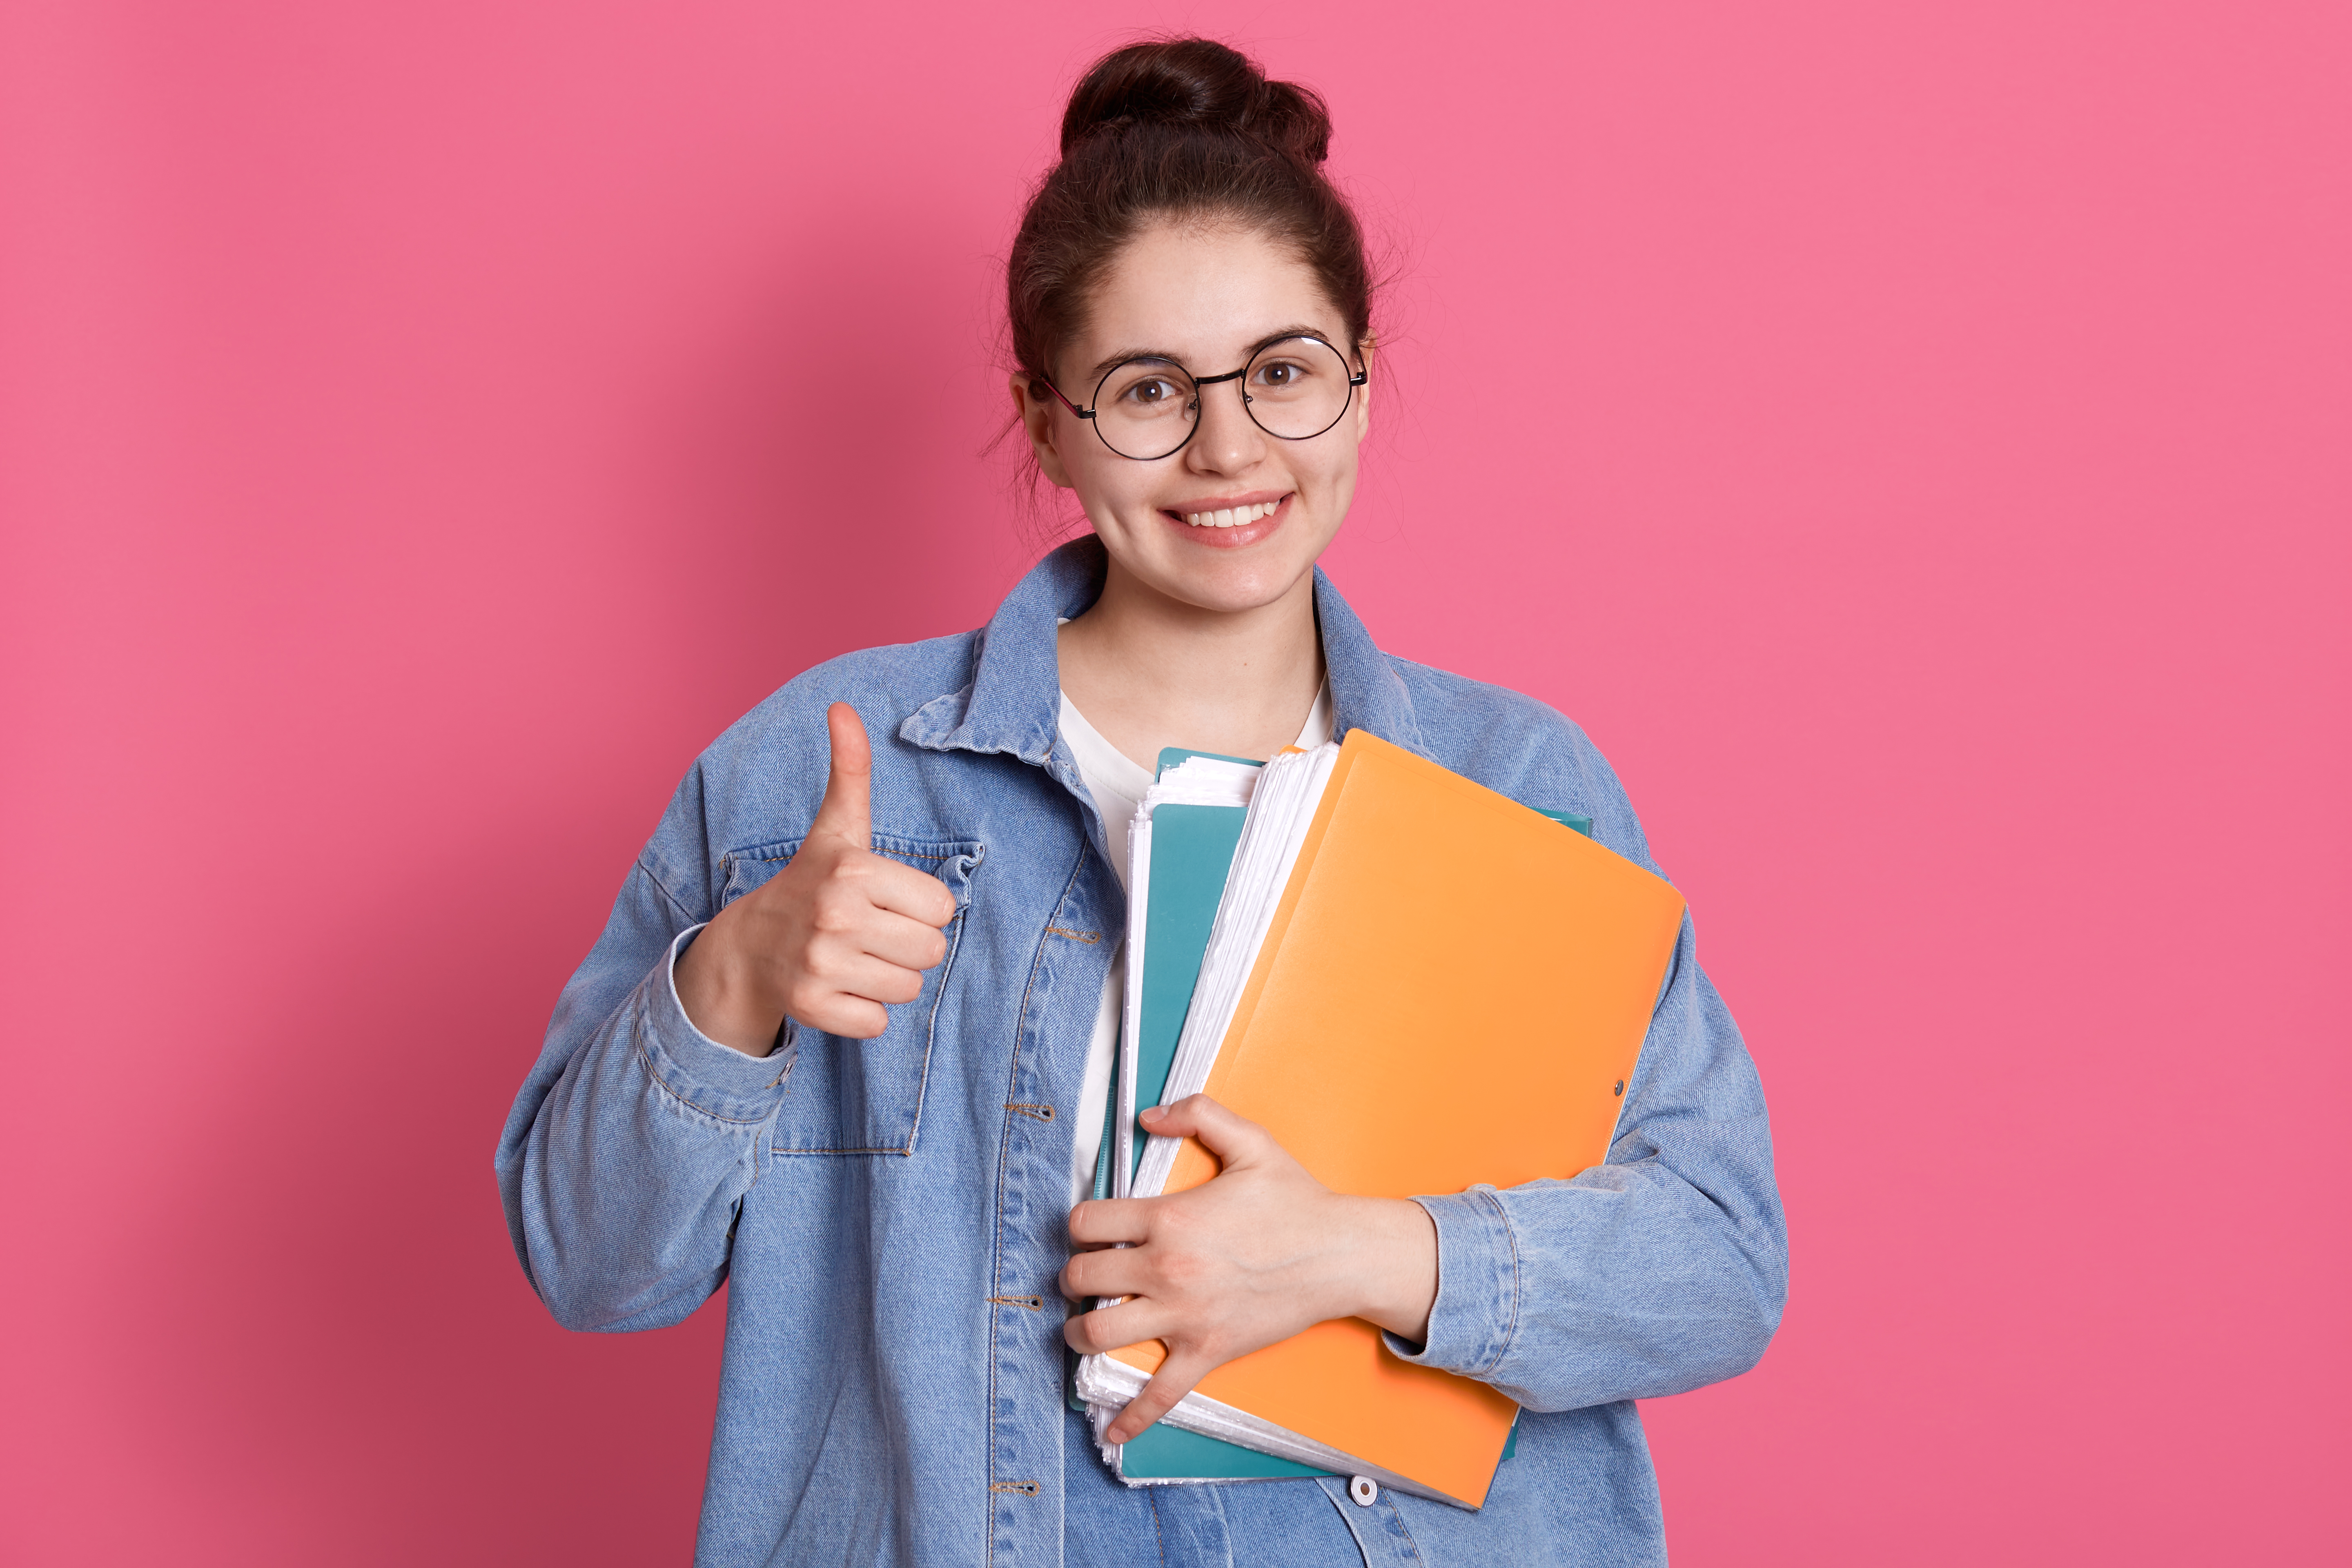 young-student-woman-wearing-denim-jacket-and-eyeglasses-holding-colorful-folders-and-showing-thumb-up-on-pink.jpg